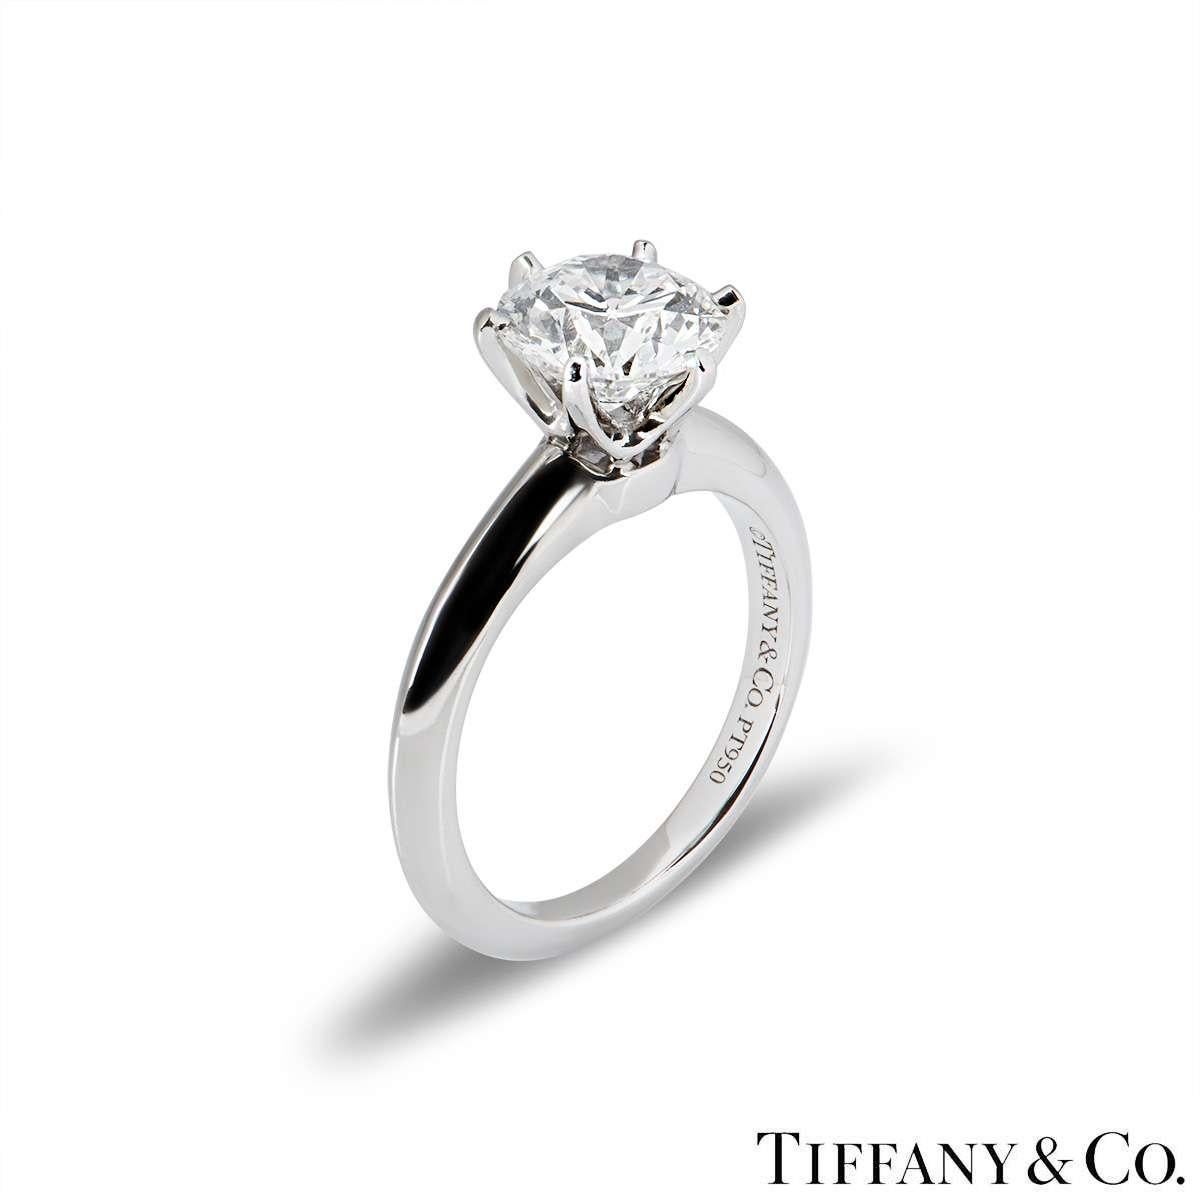 A beautiful platinum diamond ring by Tiffany & Co. from The Setting collection. The ring comprises of a round brilliant cut diamond in a 6 claw setting with a weight of 1.72ct, G colour and VVS2 clarity. The diamond scores an excellent rating in all